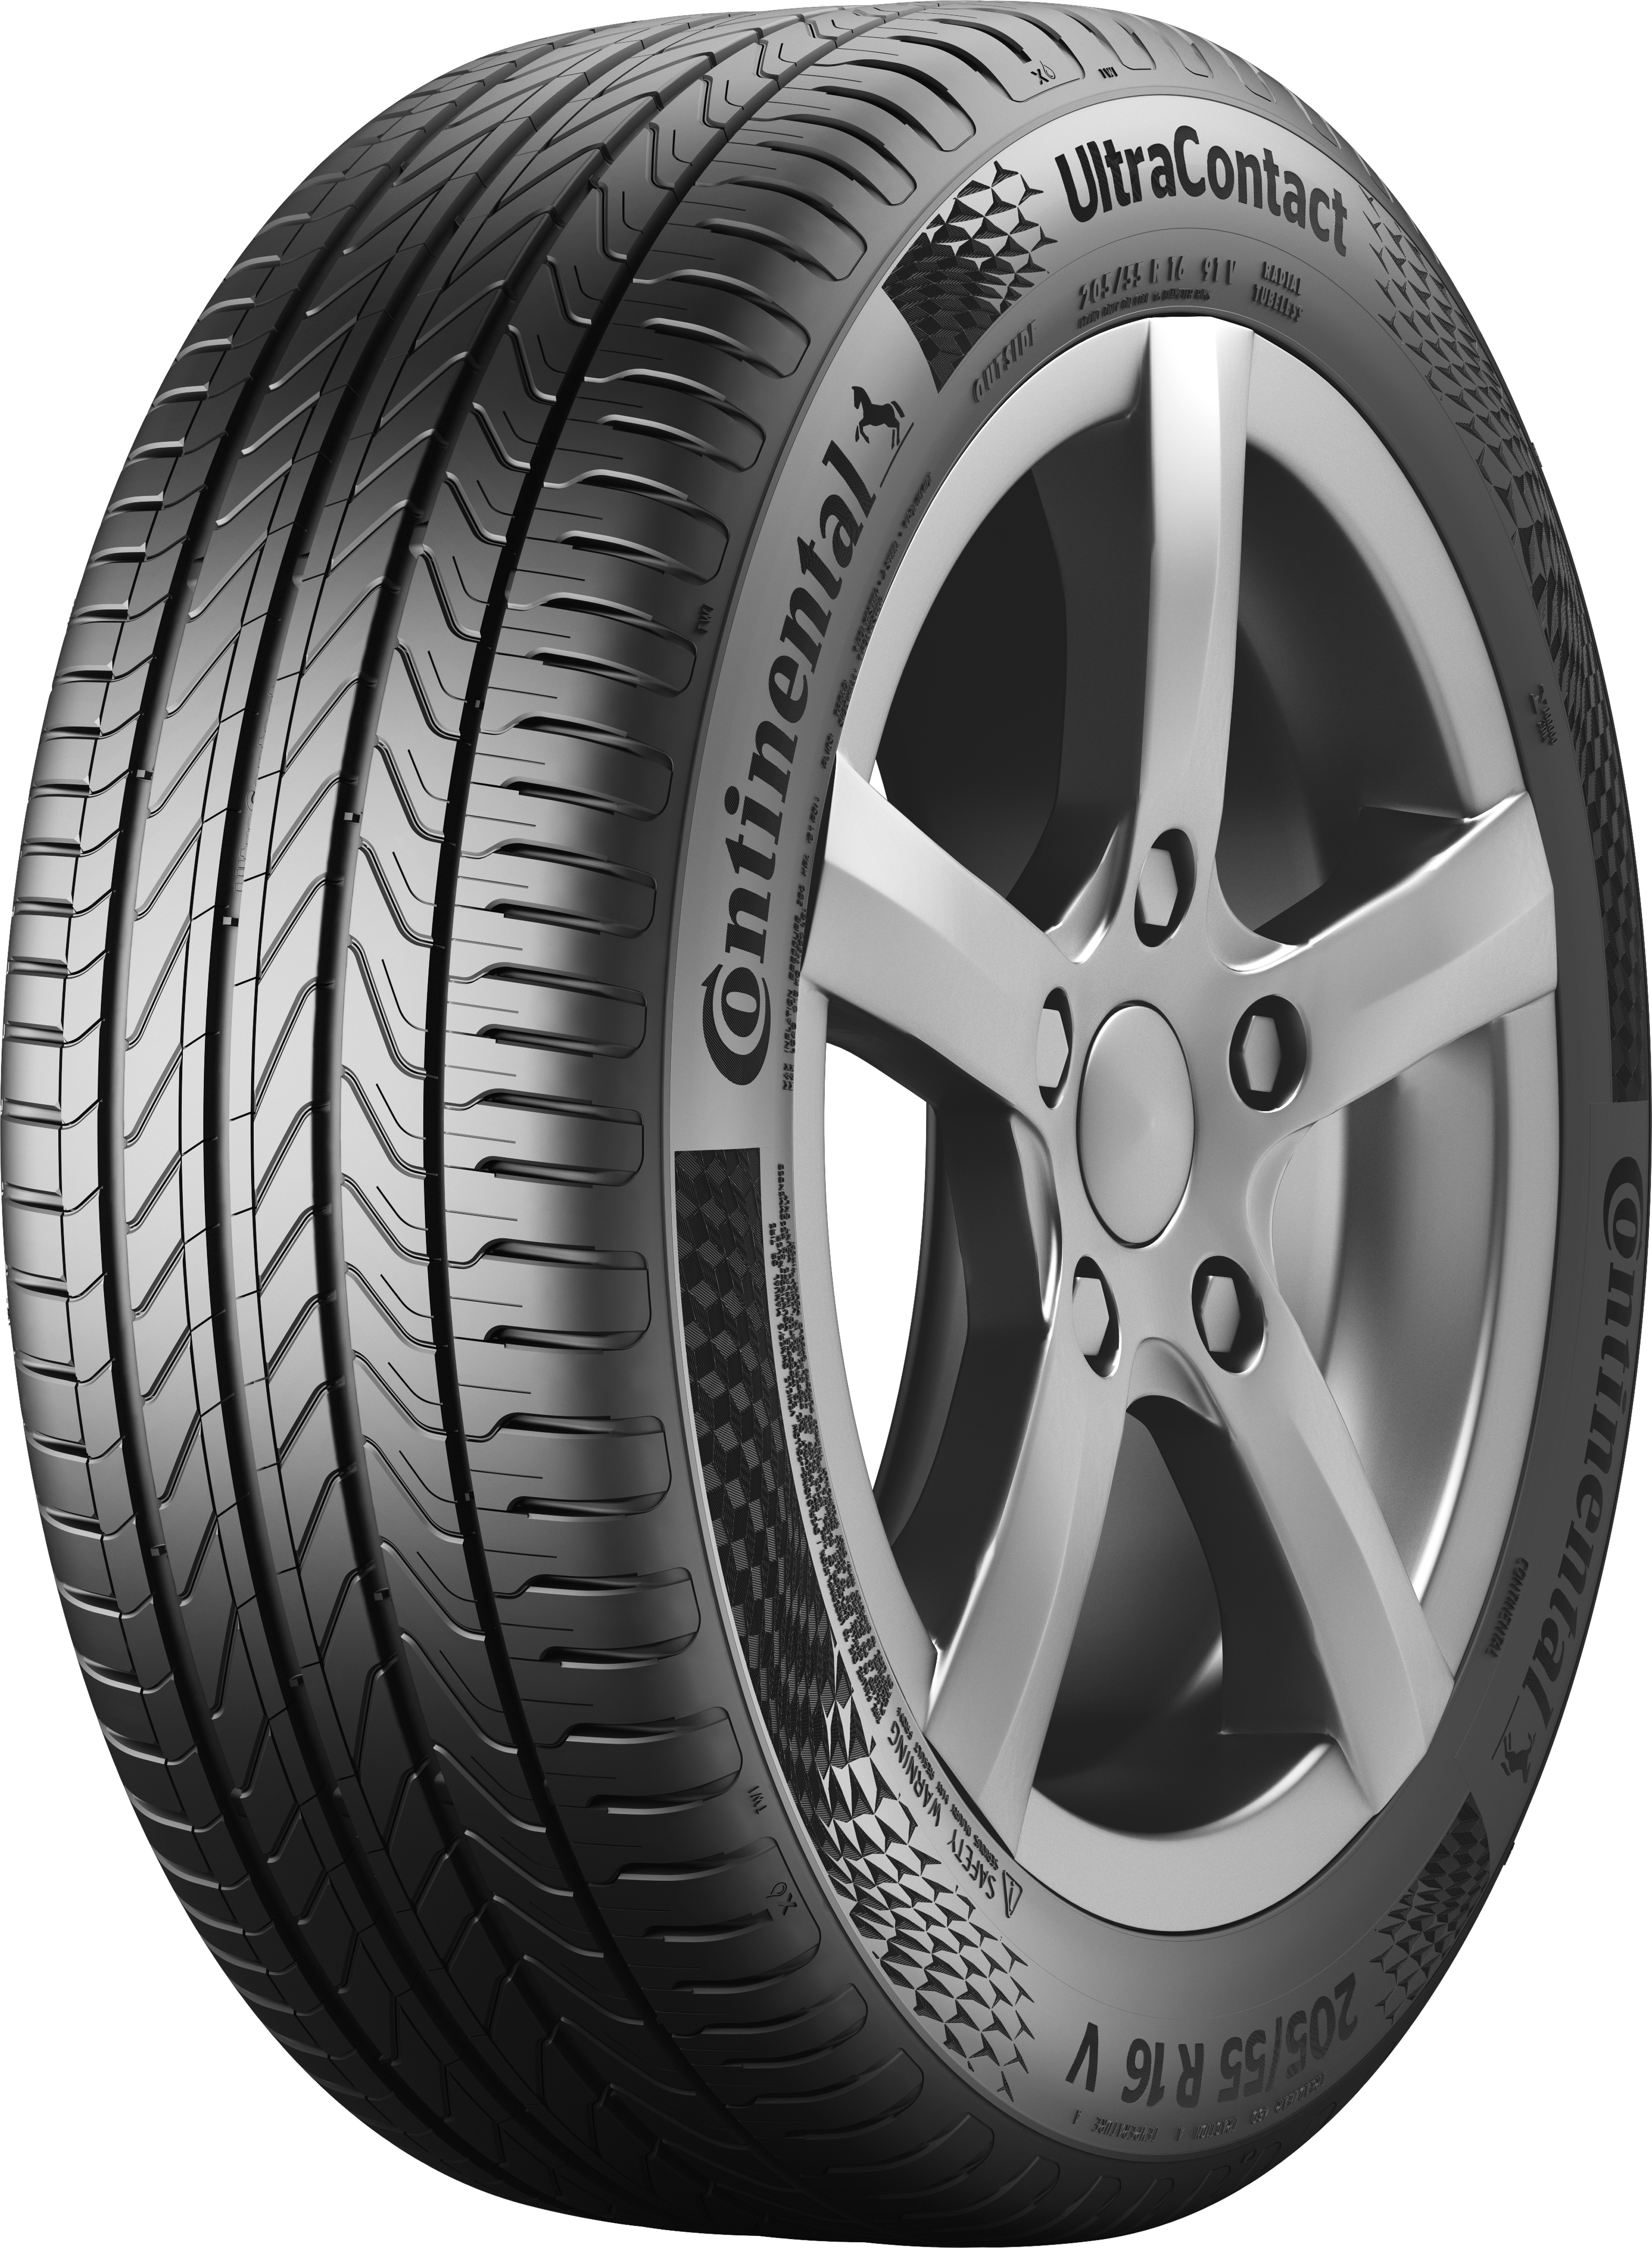 The new Continental UltraContact tire - Continental AG